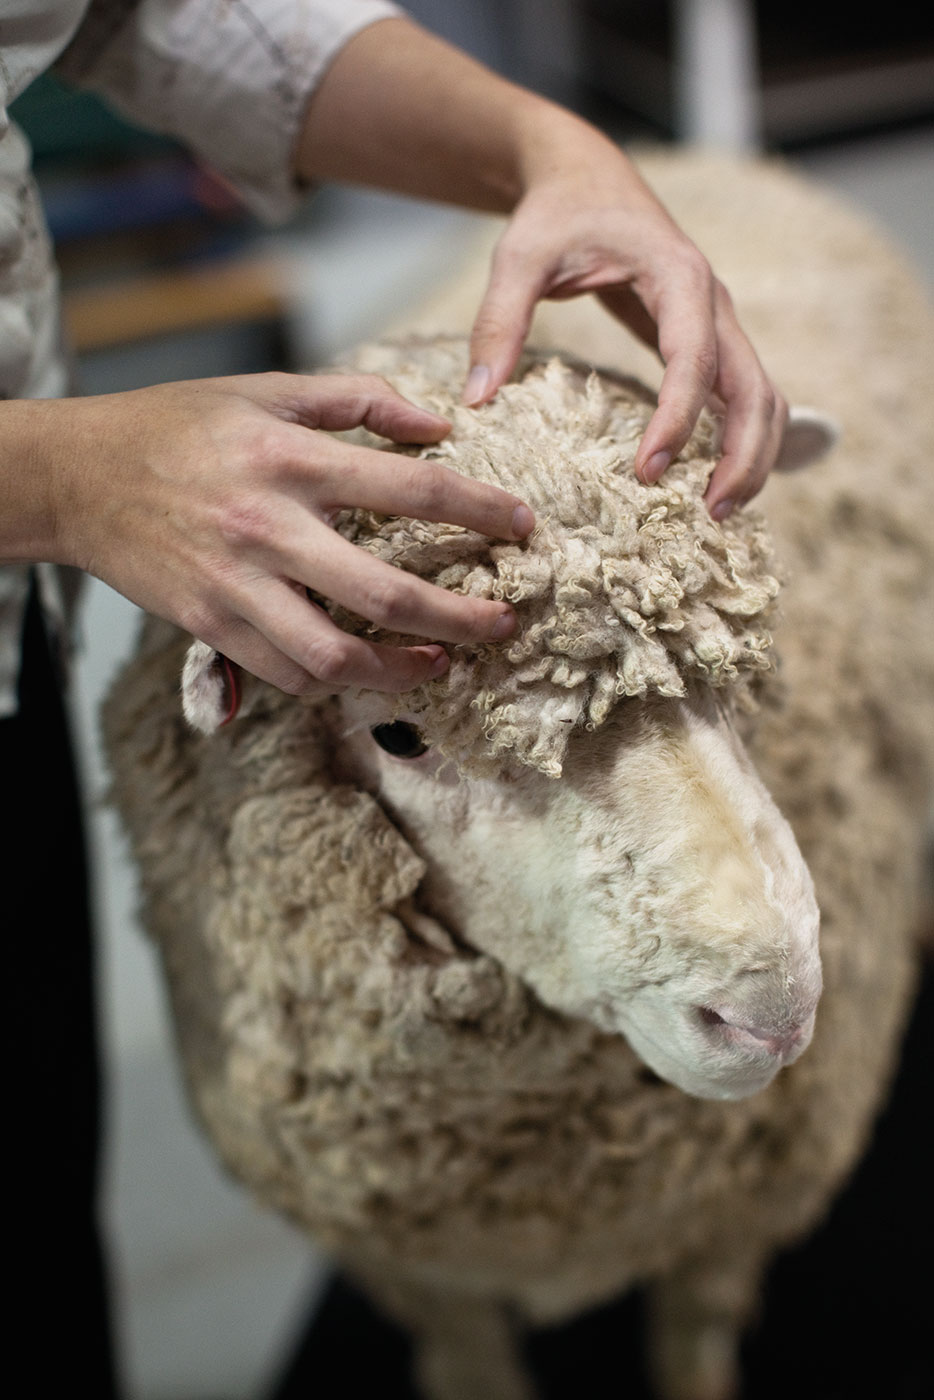 A close-up shot showing two hands extending from the left to part the fleece on the head of a taxidermied sheep. The sheep's snout and head are clearly visible.